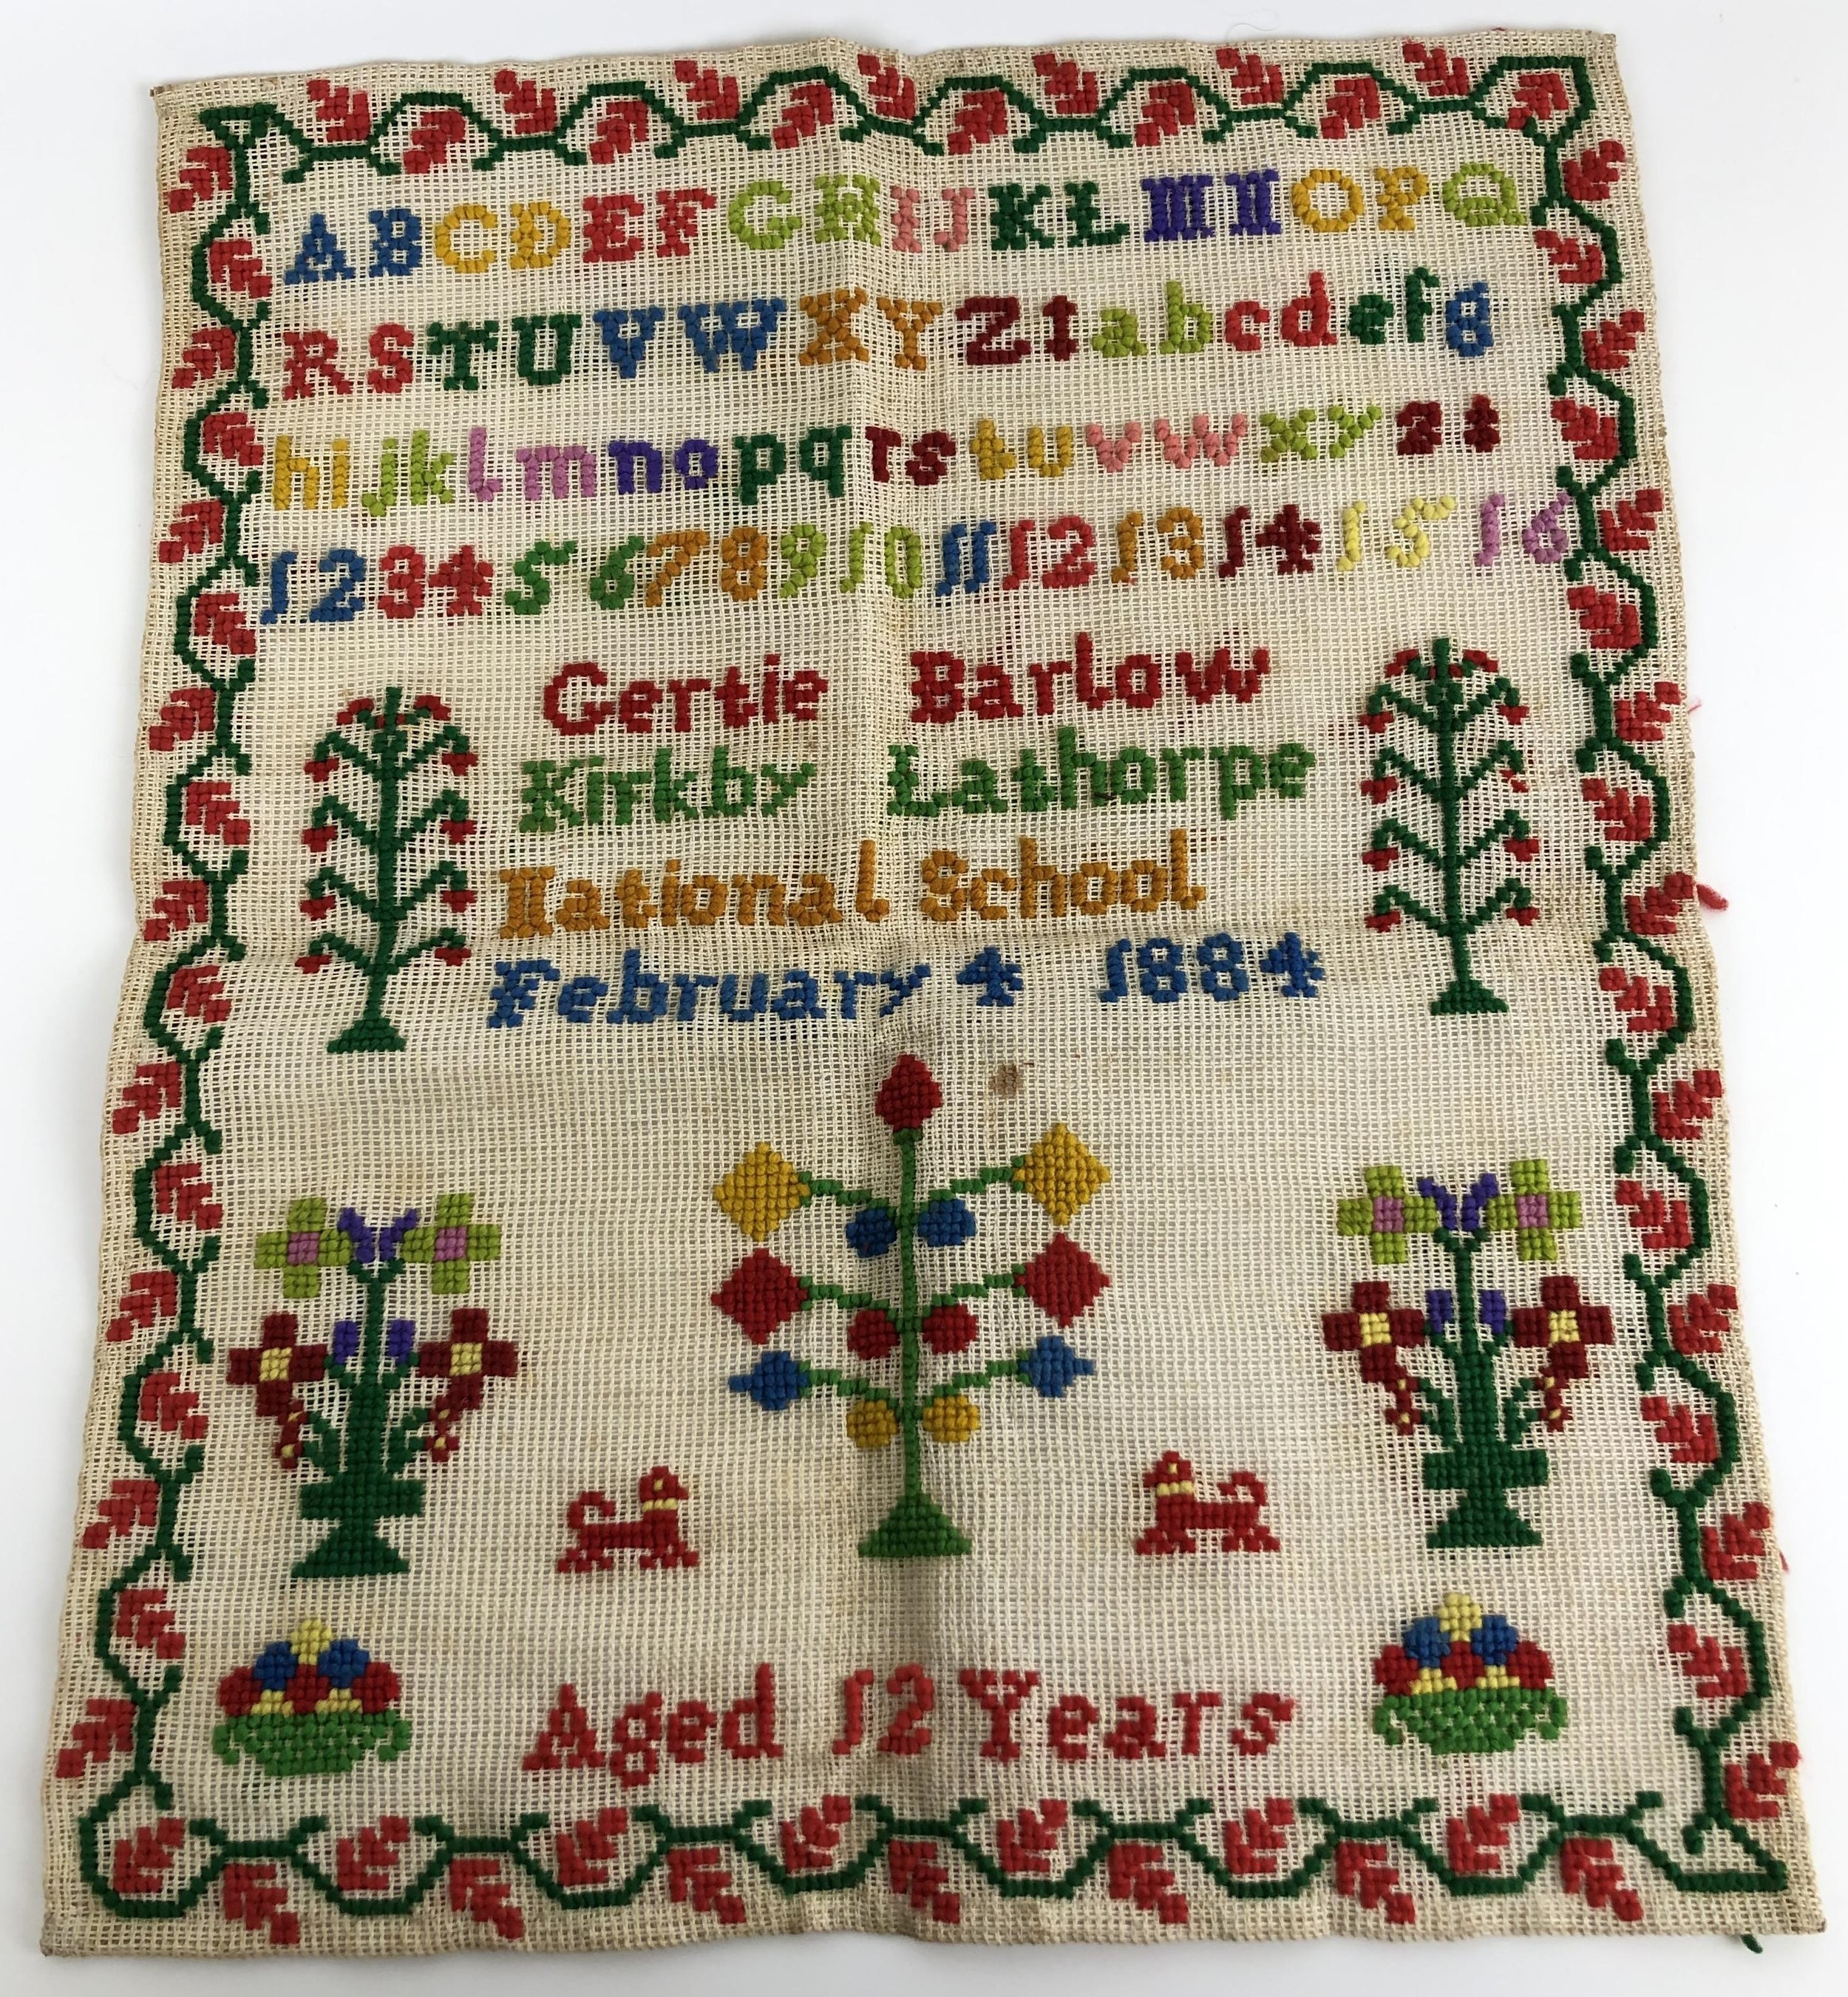 A Victorian sampler, signed Gertie Barlow of Kirkby Landthorpe National School, aged 12 years old,